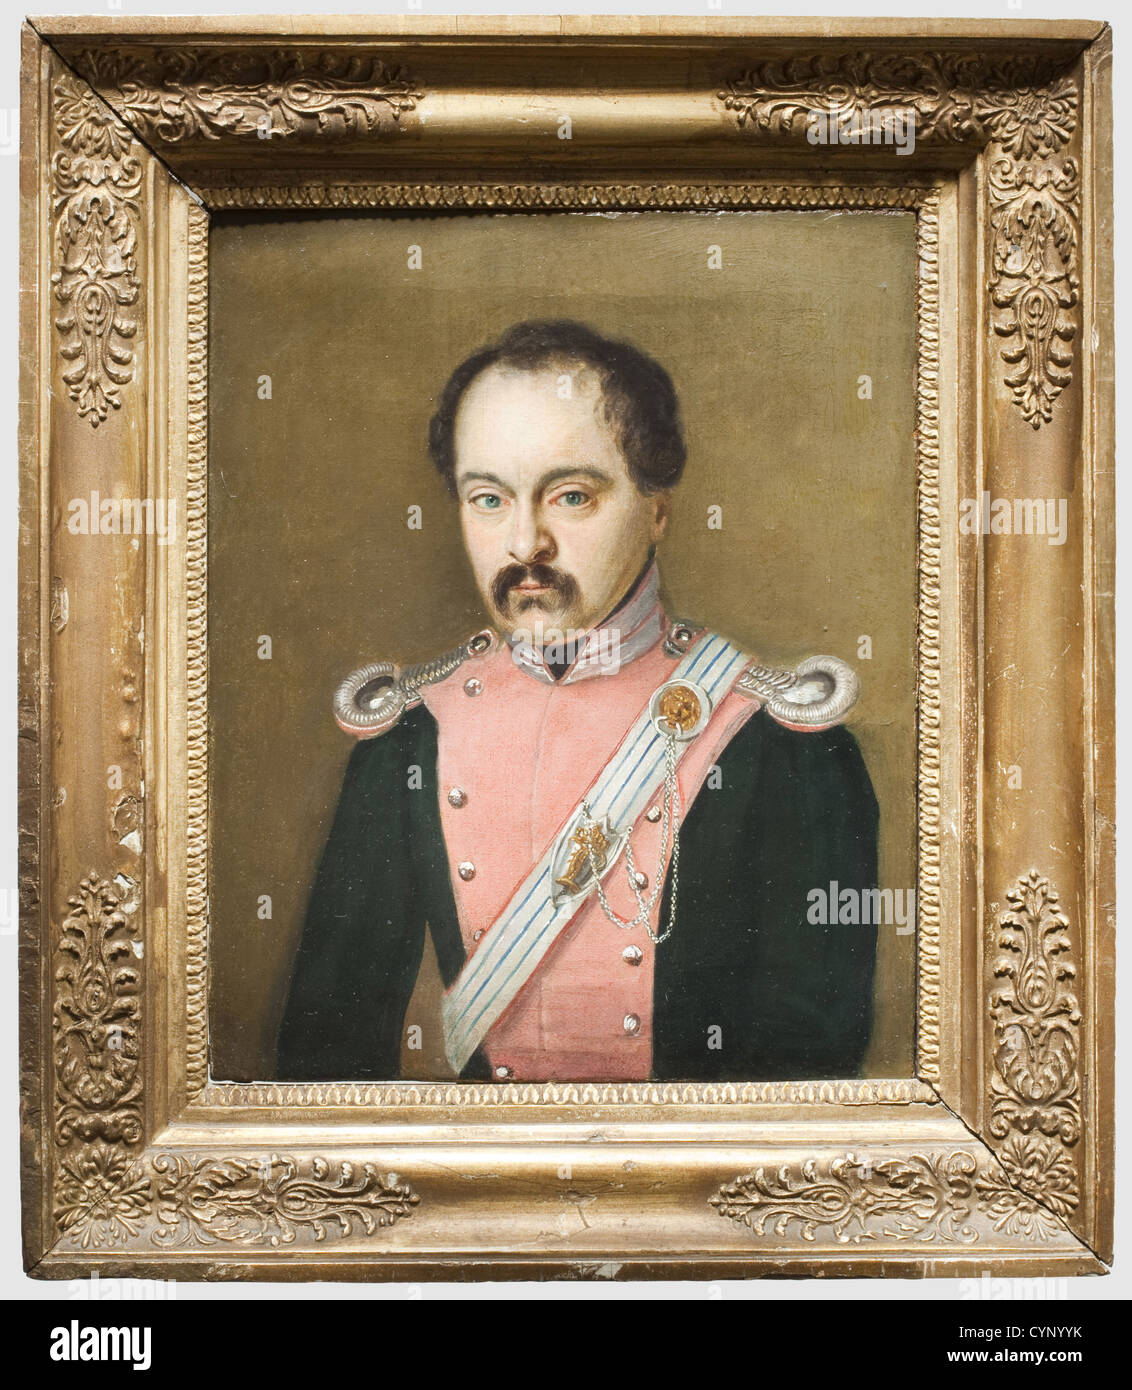 F.X. Mandl (1800 - ?) - a portrait of J. v. Maffei, Oil on canvas, dimensions 21 x 26 cm. Half portrait of the First Lieutenant Johann von Maffei wearing the uniform of the 6th Chevauleger Regiment Herzog von Leuchtenberg, 1837. Signed on the canvas on the reverse side 'X. Mandl p. 1837'. In an old, golden plaster frame. The painter Franz Xaver Mandl from Salzburg studied in Munich and was later working as a portraitist in Bamberg. Excellent quality, very interesting respective the uniform, people, 19th century, Bavaria, Bavarian, German, Germany, Southern Germ, Stock Photo